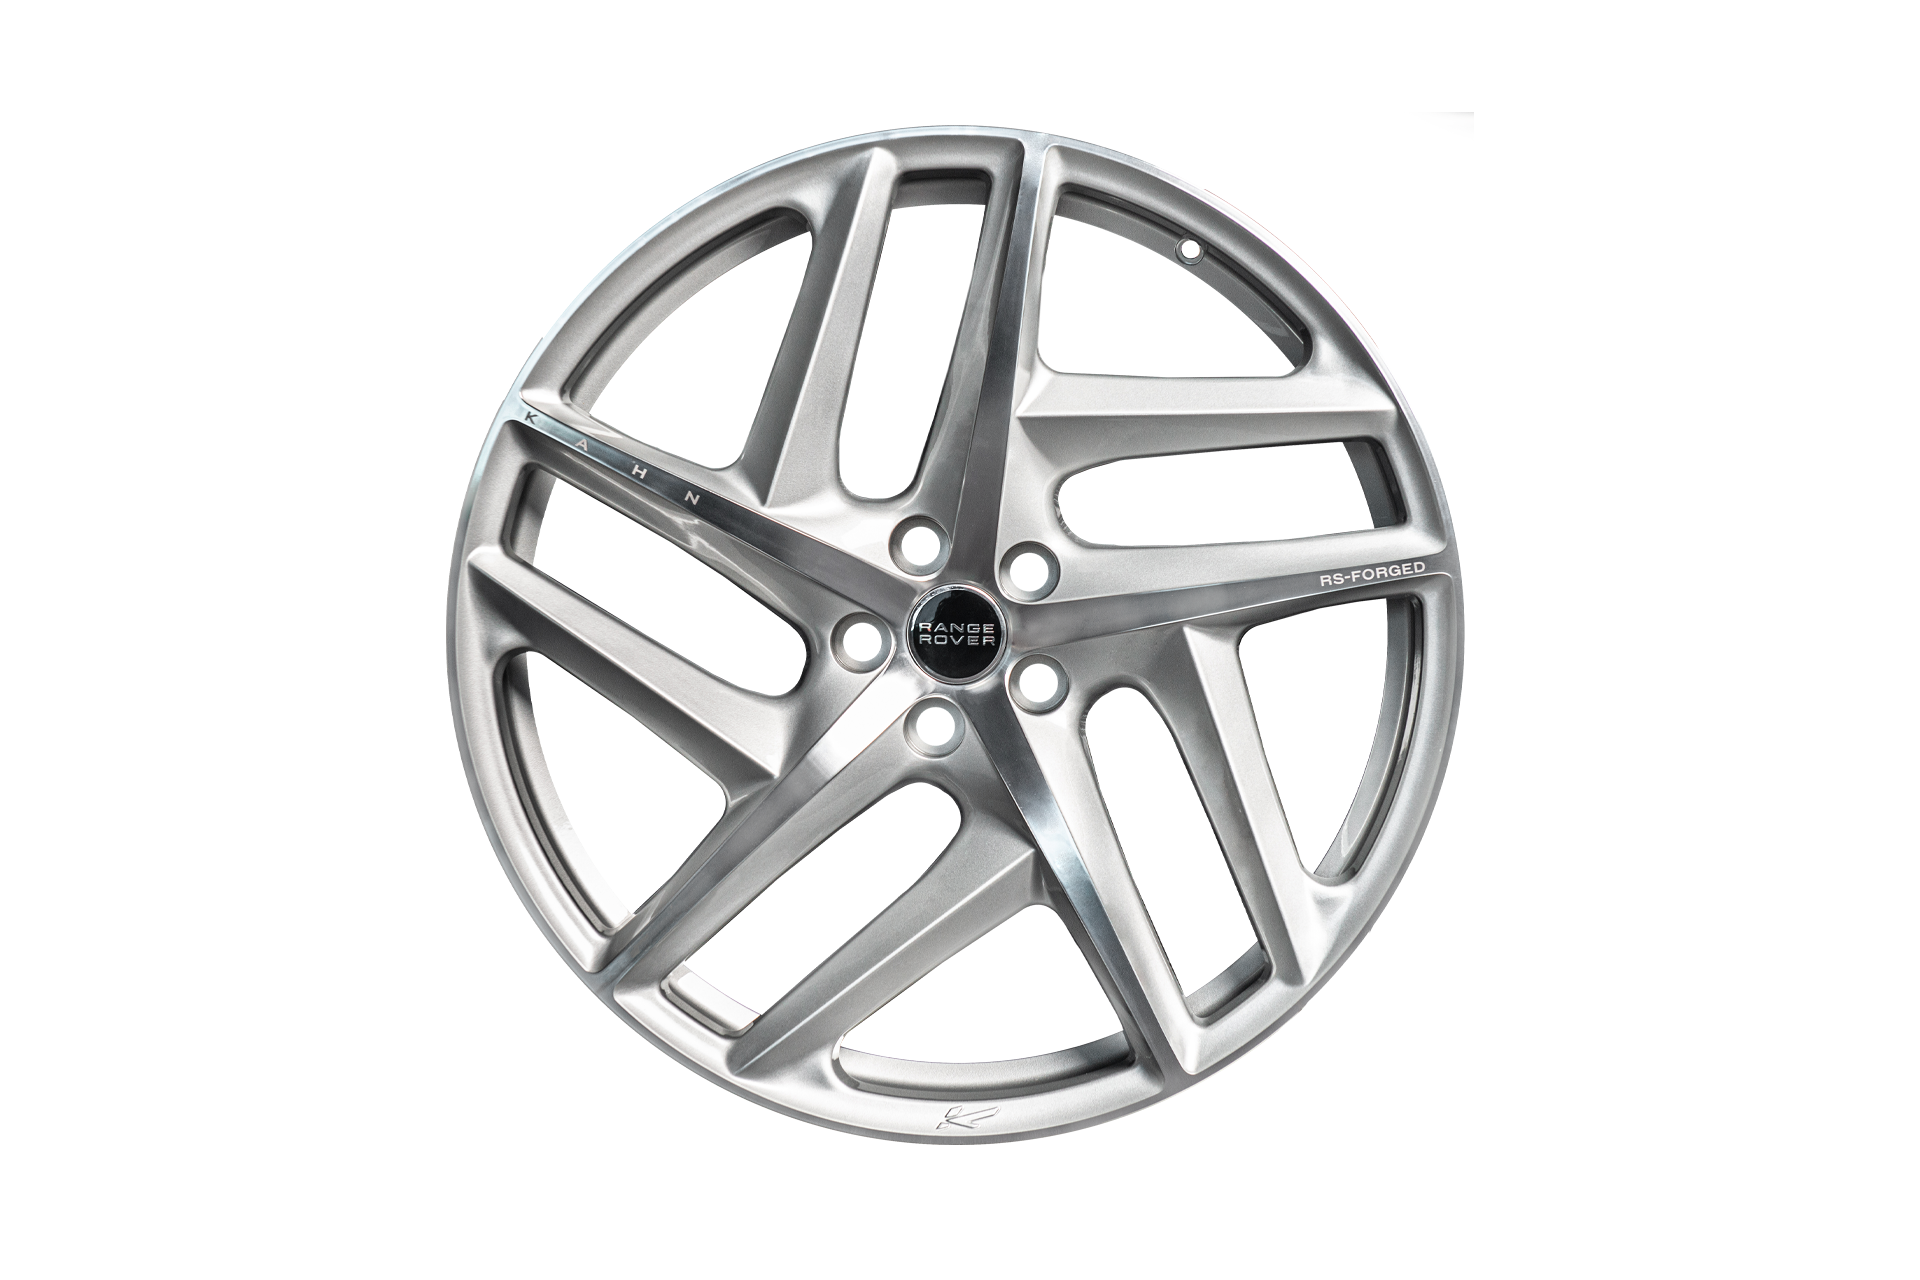 Range Rover Sport (2013-2018) Type 52 RS-Forged Alloy Wheels